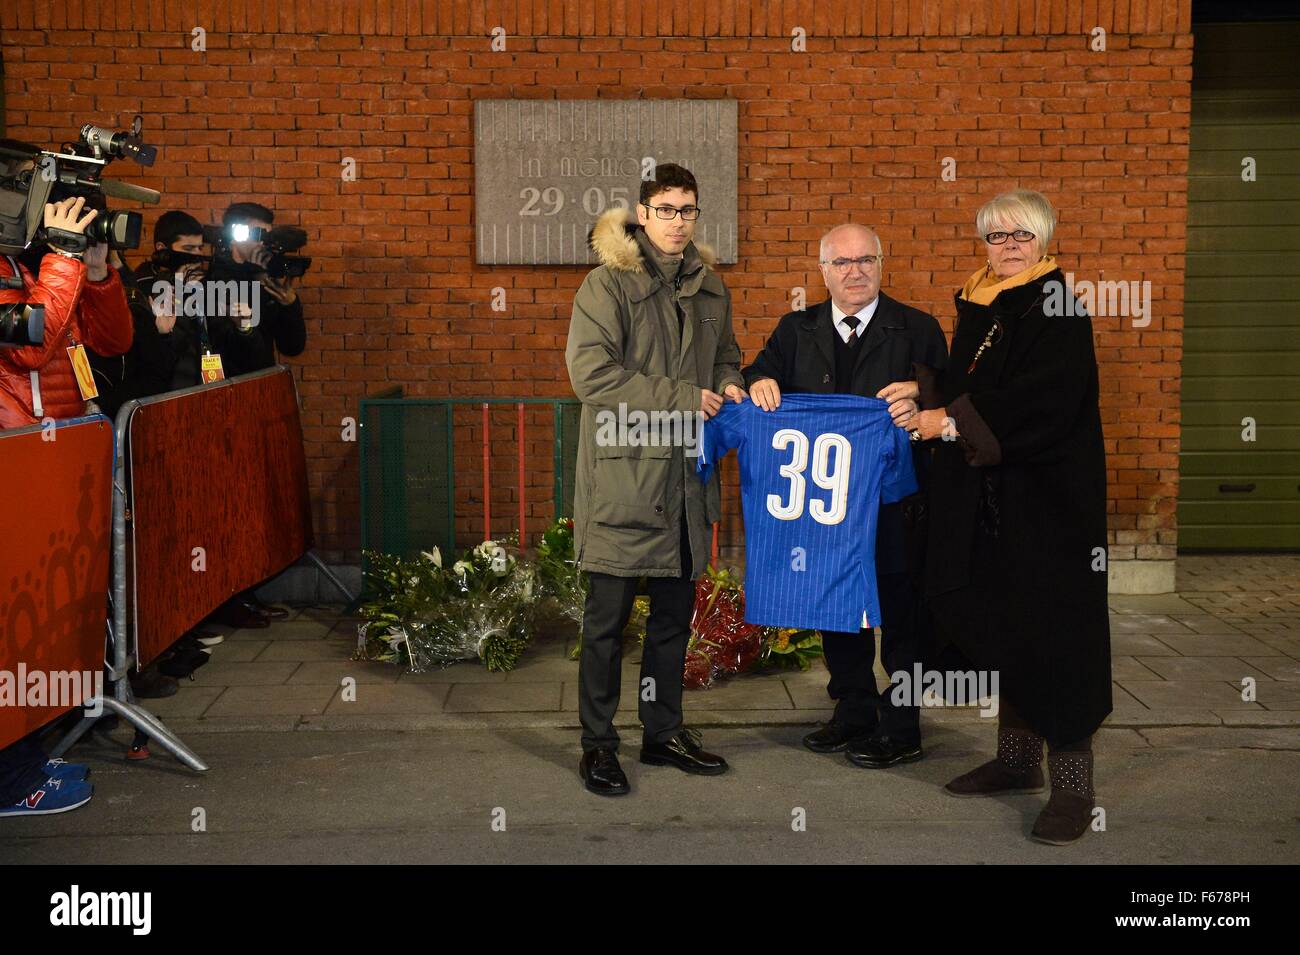 12.11.2015. King Baudouin Stadium (Formerly Heysel Stadium) Brussels, Belgium. The Juventus team visit the location where 39 fans from Liverpool and Juventus were killed during riots at the European cup final in May 1985 (30 years ago).  Relatives of the Juventus victims place flowers at the memorial during a commemoration of the Heysel Stadium disaster 30 years ago Stock Photo